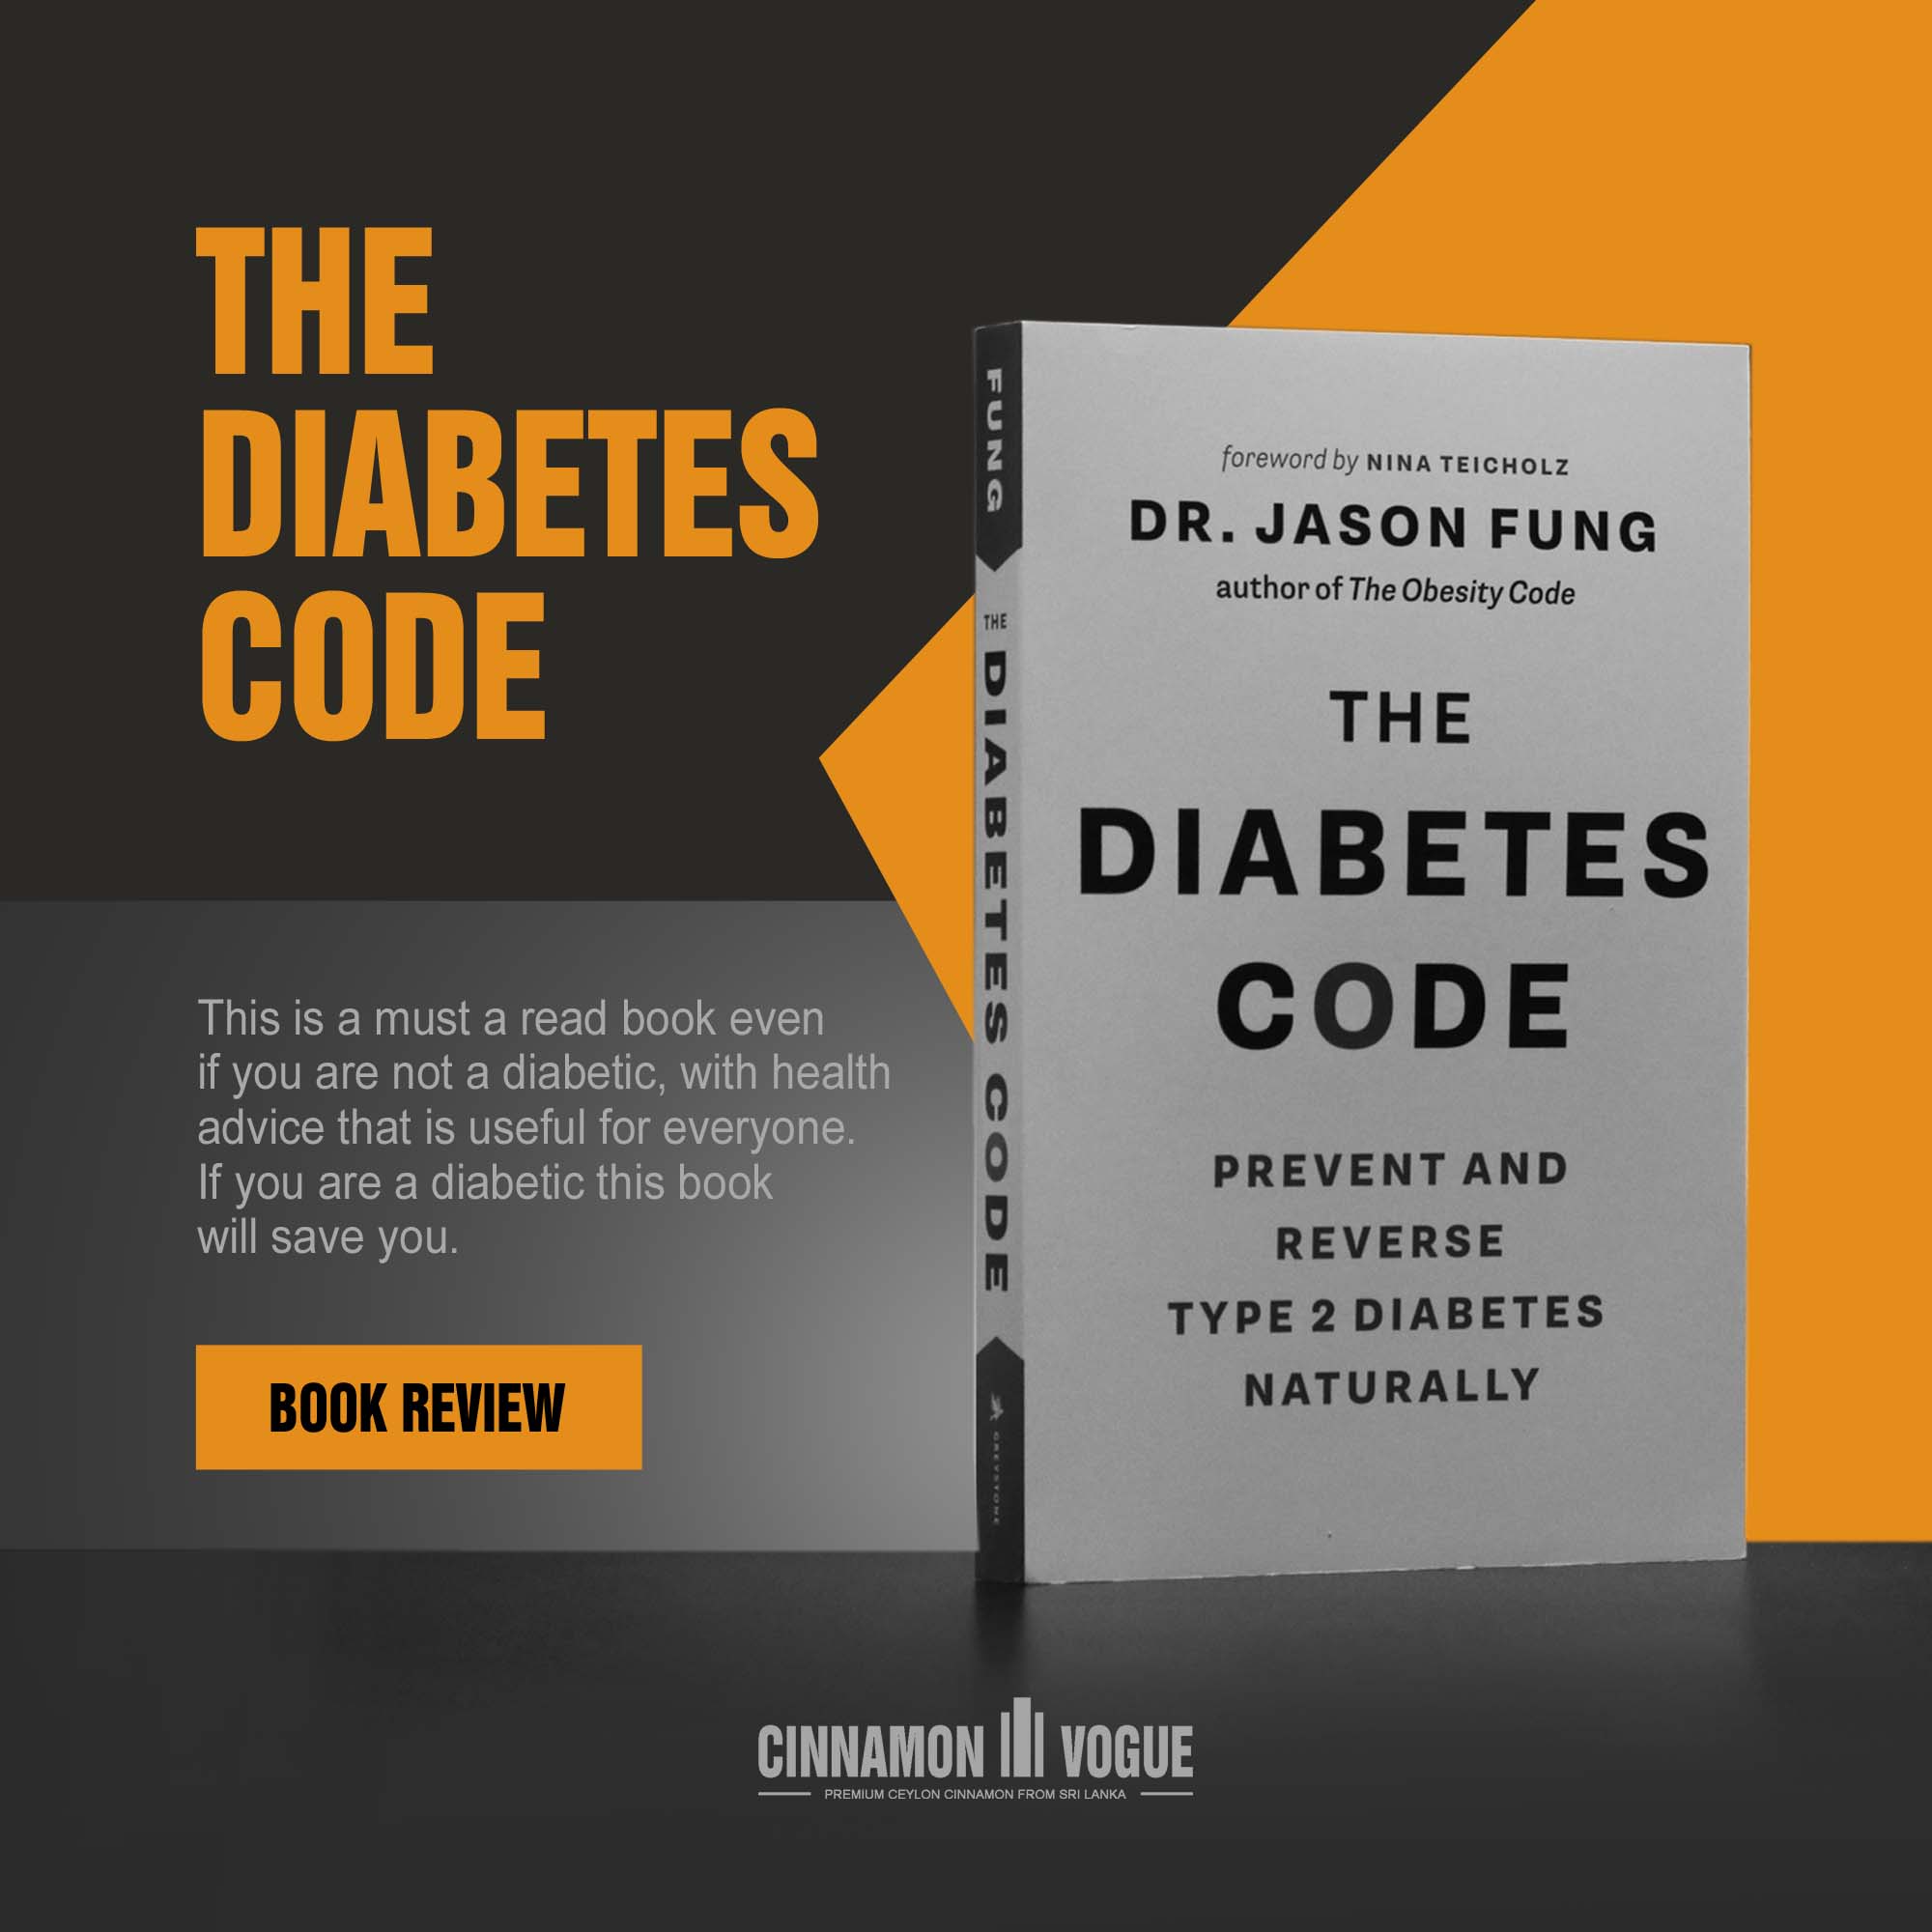 jason_fung_the_diabetes_code-2_low_res